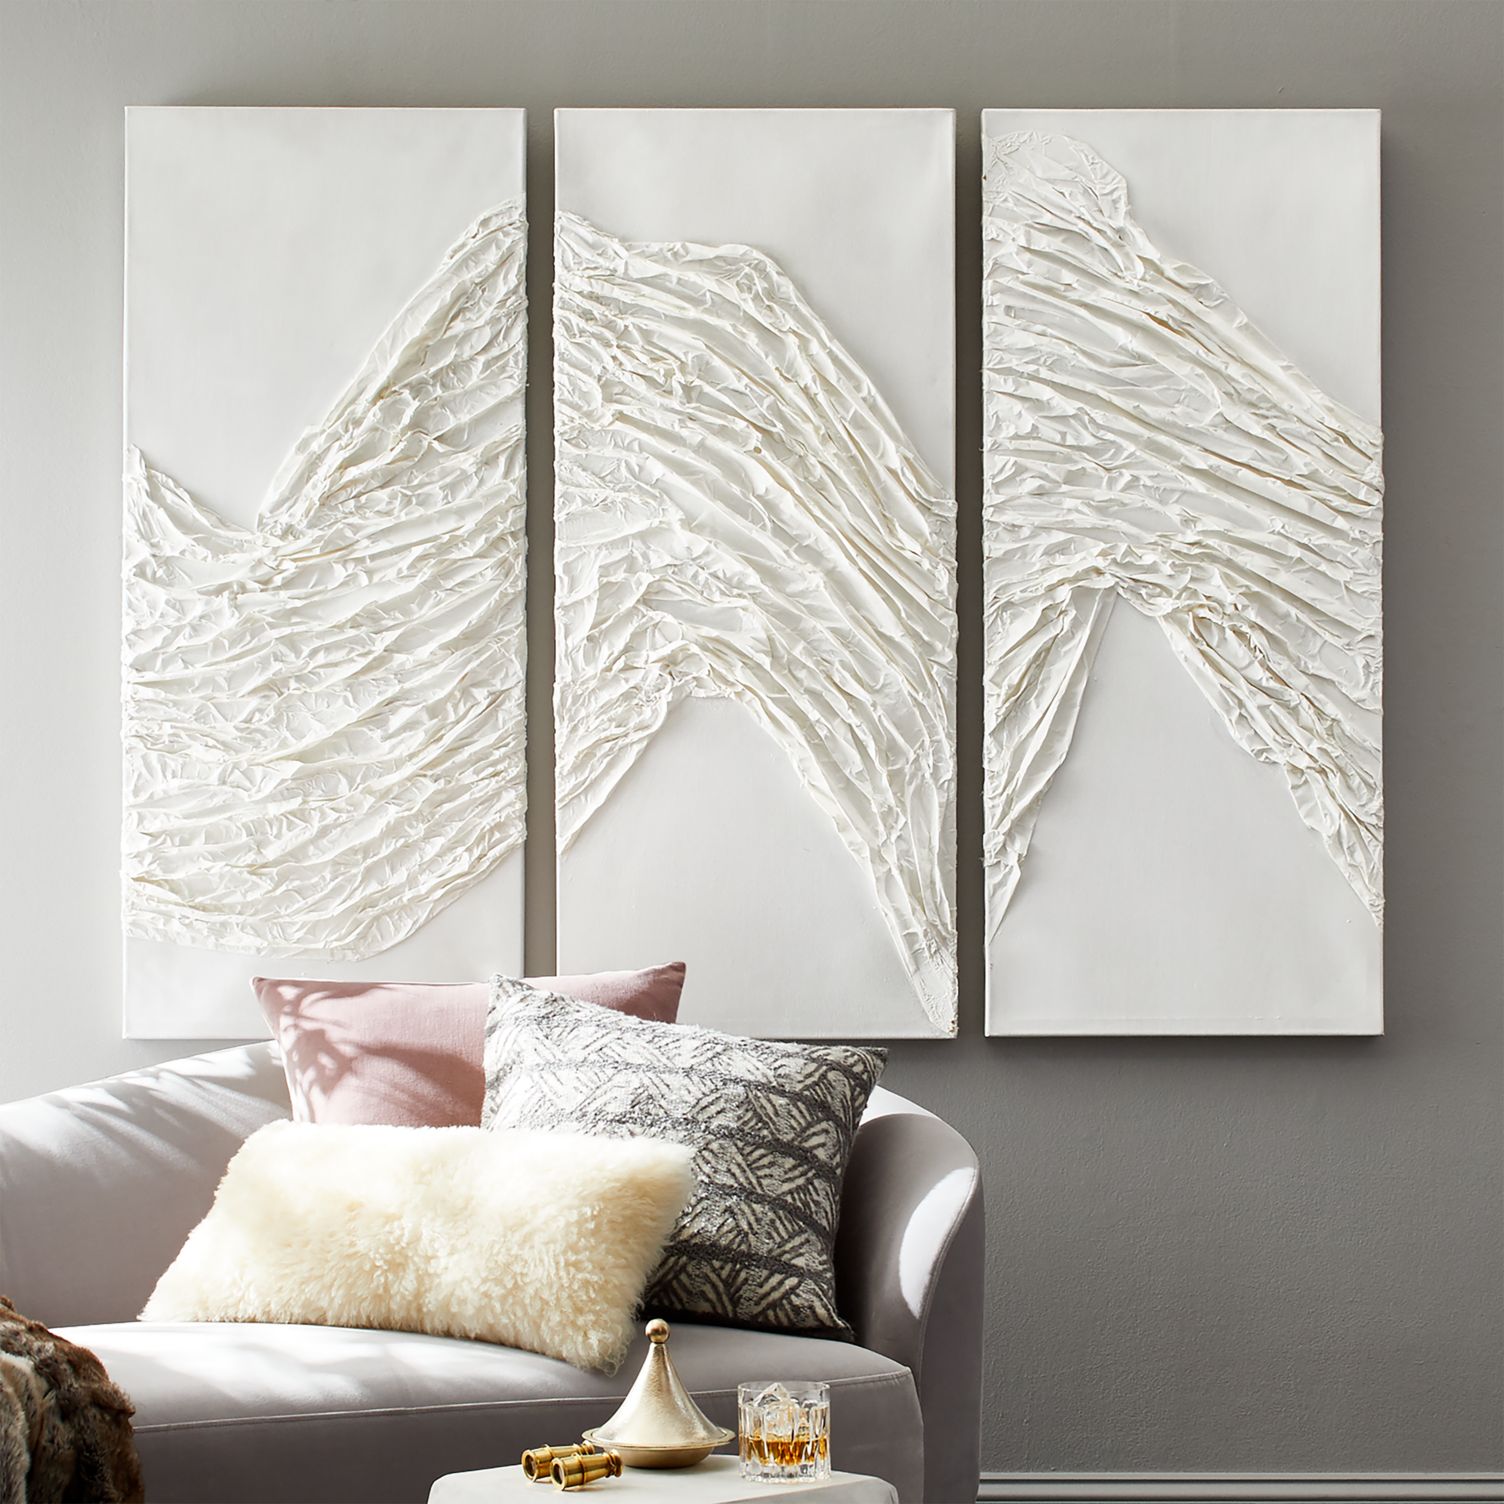 Textured-wall-art-from-CB2